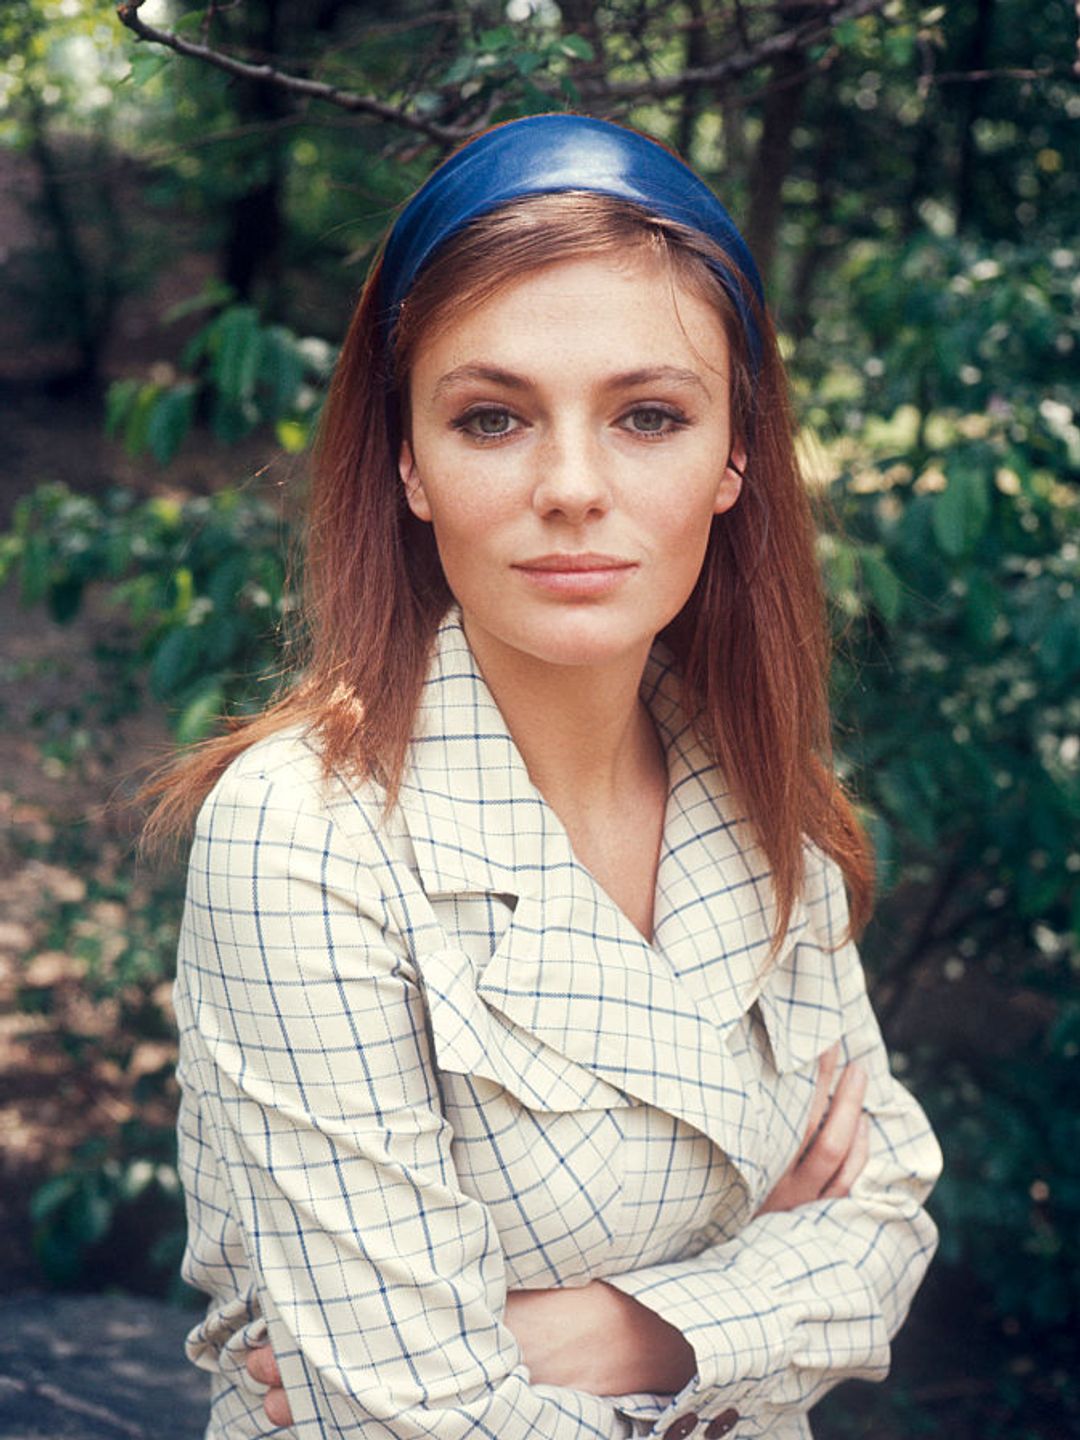 Jacqueline Bisset pictured in 1970. She is wearing a blue headband and a checked jacket. 